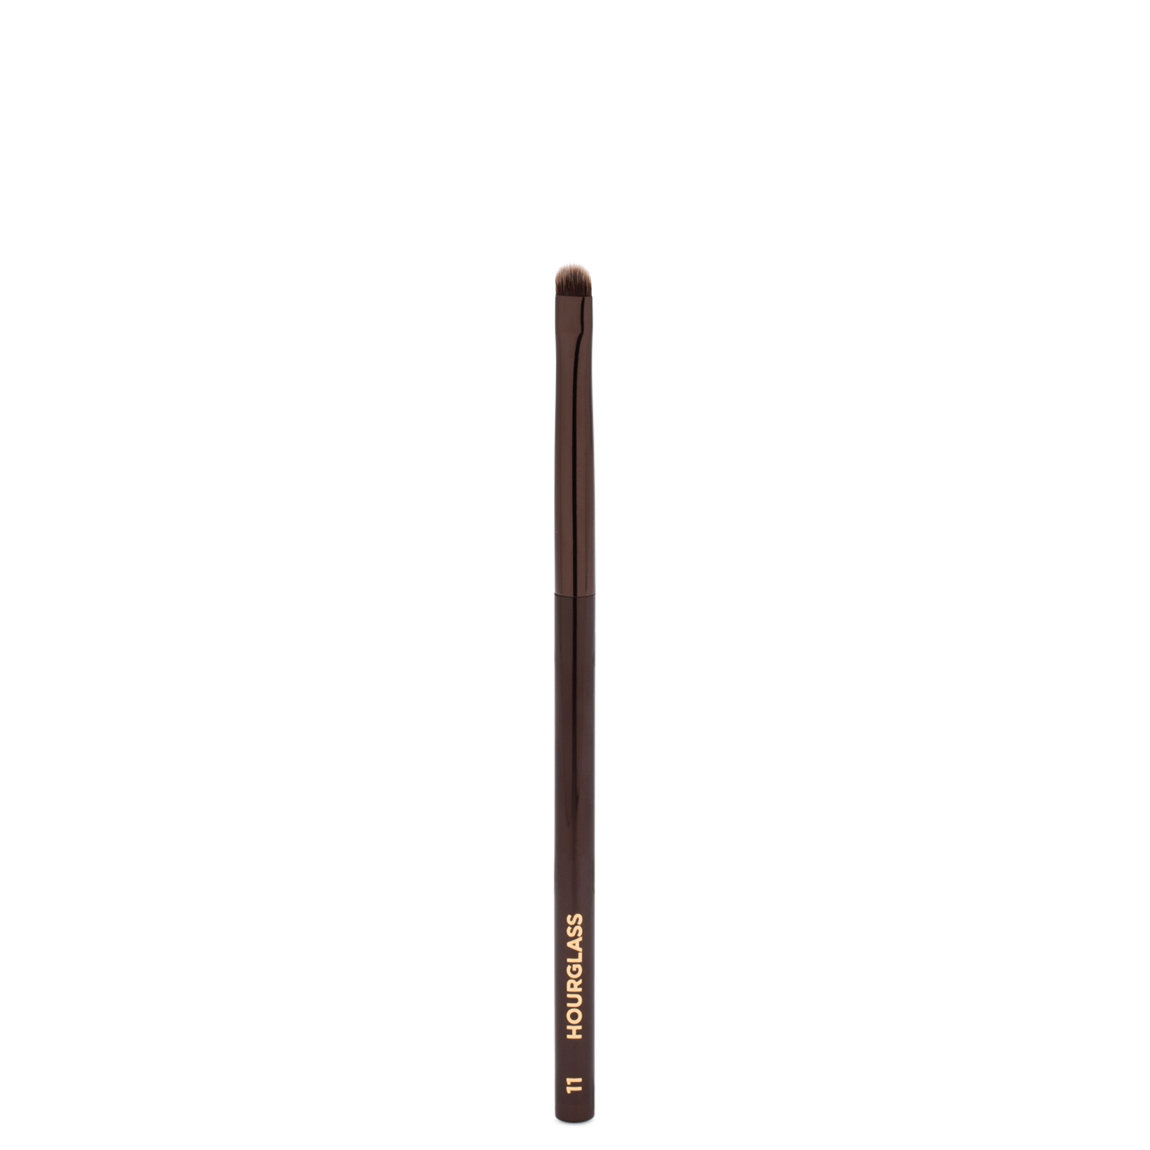 Hourglass N° 11 Smudge Brush alternative view 1 - product swatch.